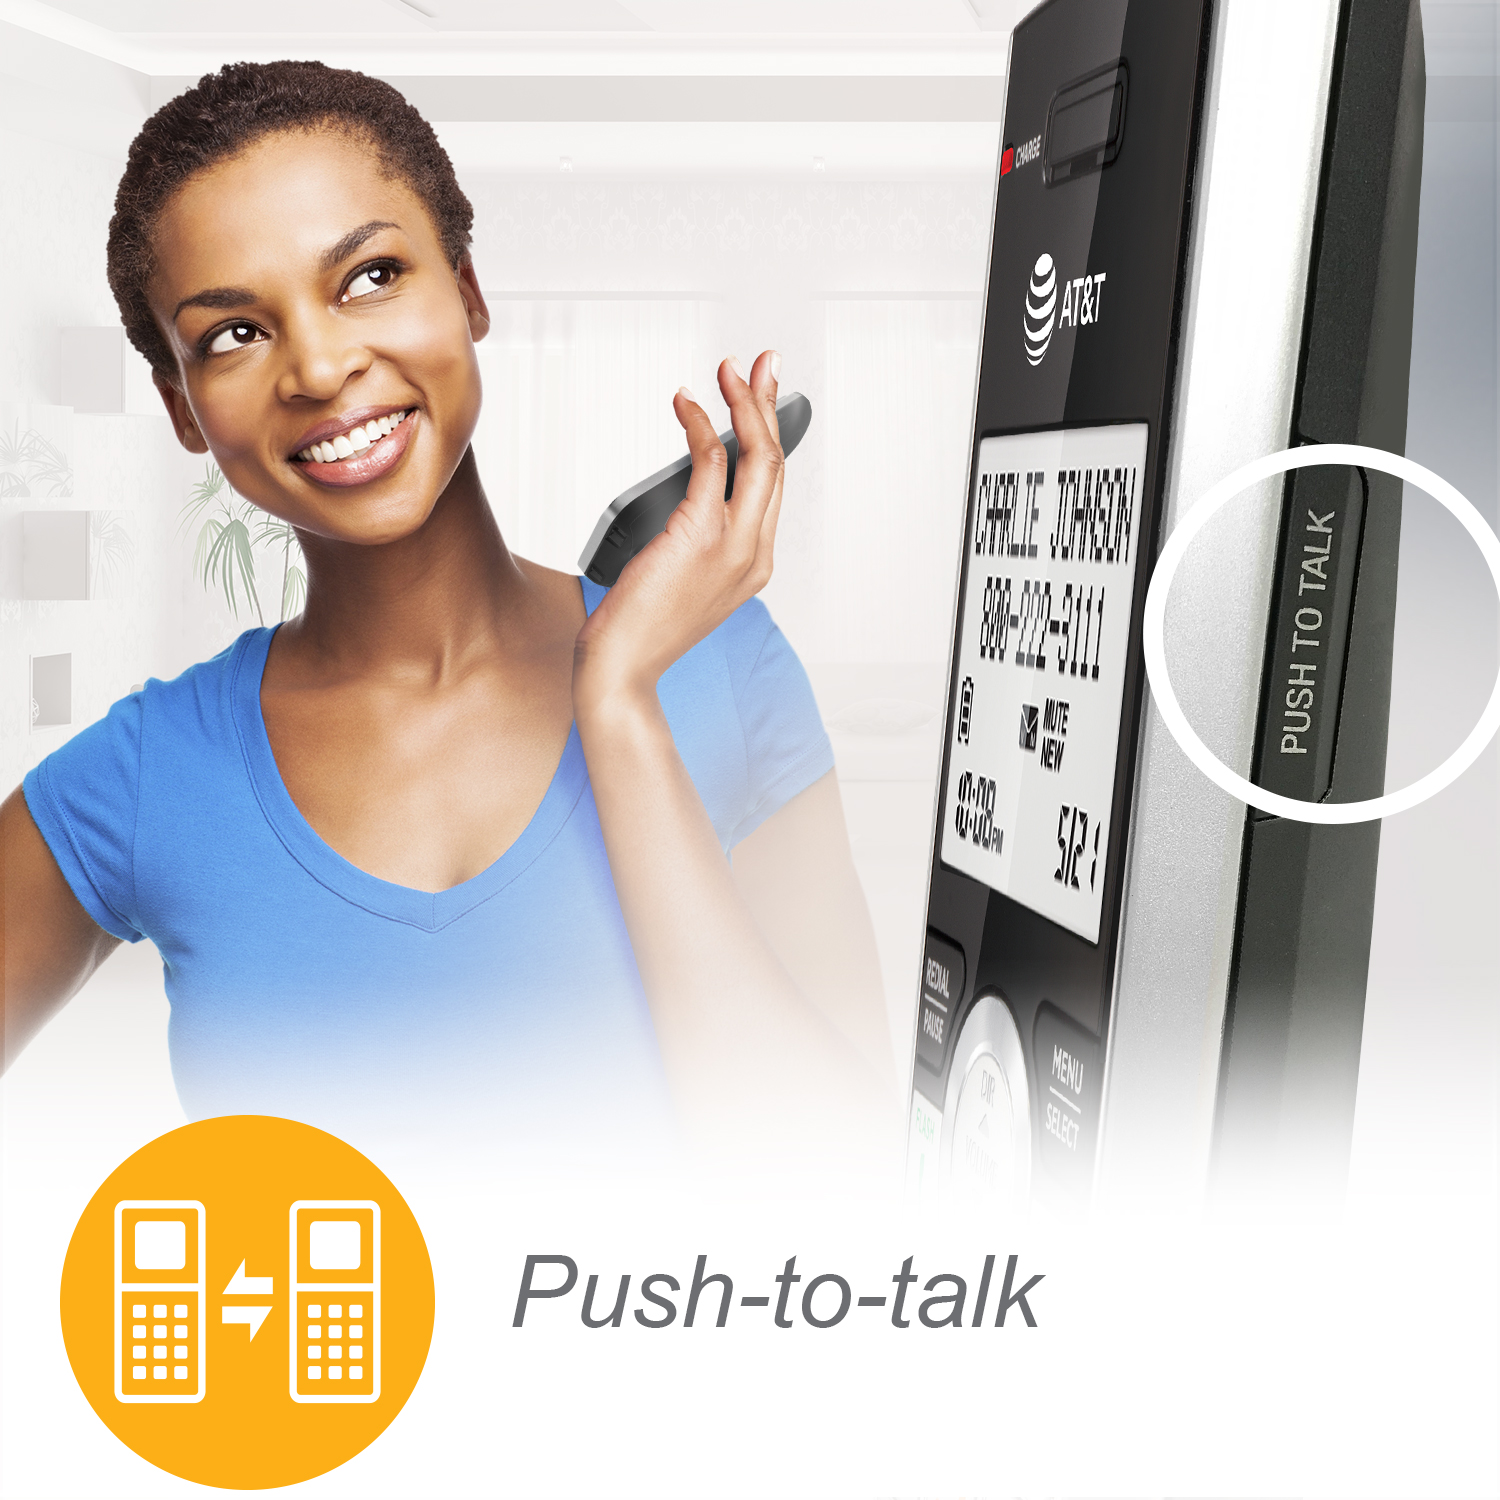 5-Handset Expandable Cordless Phone with Unsurpassed Range, Smart Call Blocker and Answering System - view 11